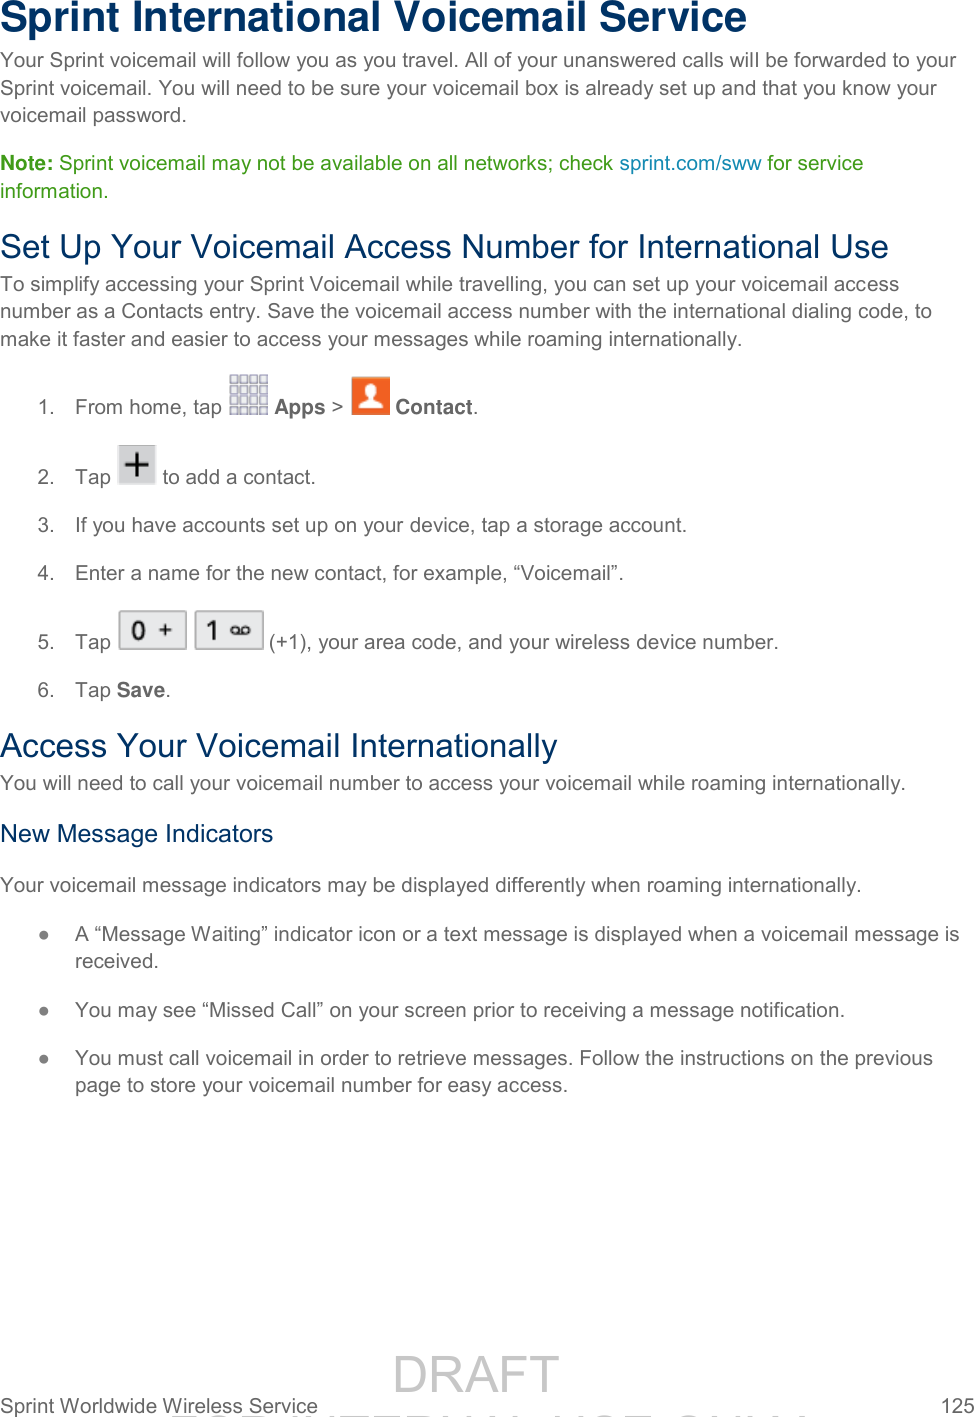                 DRAFT FOR INTERNAL USE ONLY Sprint Worldwide Wireless Service  125   Sprint International Voicemail Service Your Sprint voicemail will follow you as you travel. All of your unanswered calls will be forwarded to your Sprint voicemail. You will need to be sure your voicemail box is already set up and that you know your voicemail password. Note: Sprint voicemail may not be available on all networks; check sprint.com/sww for service information. Set Up Your Voicemail Access Number for International Use To simplify accessing your Sprint Voicemail while travelling, you can set up your voicemail access number as a Contacts entry. Save the voicemail access number with the international dialing code, to make it faster and easier to access your messages while roaming internationally. 1.  From home, tap   Apps &gt;   Contact. 2.  Tap   to add a contact. 3.  If you have accounts set up on your device, tap a storage account. 4. Enter a name for the new contact, for example, “Voicemail”. 5.  Tap     (+1), your area code, and your wireless device number.  6.  Tap Save. Access Your Voicemail Internationally You will need to call your voicemail number to access your voicemail while roaming internationally. New Message Indicators Your voicemail message indicators may be displayed differently when roaming internationally. ● A “Message Waiting” indicator icon or a text message is displayed when a voicemail message is received.  ● You may see “Missed Call” on your screen prior to receiving a message notification. ● You must call voicemail in order to retrieve messages. Follow the instructions on the previous page to store your voicemail number for easy access. 